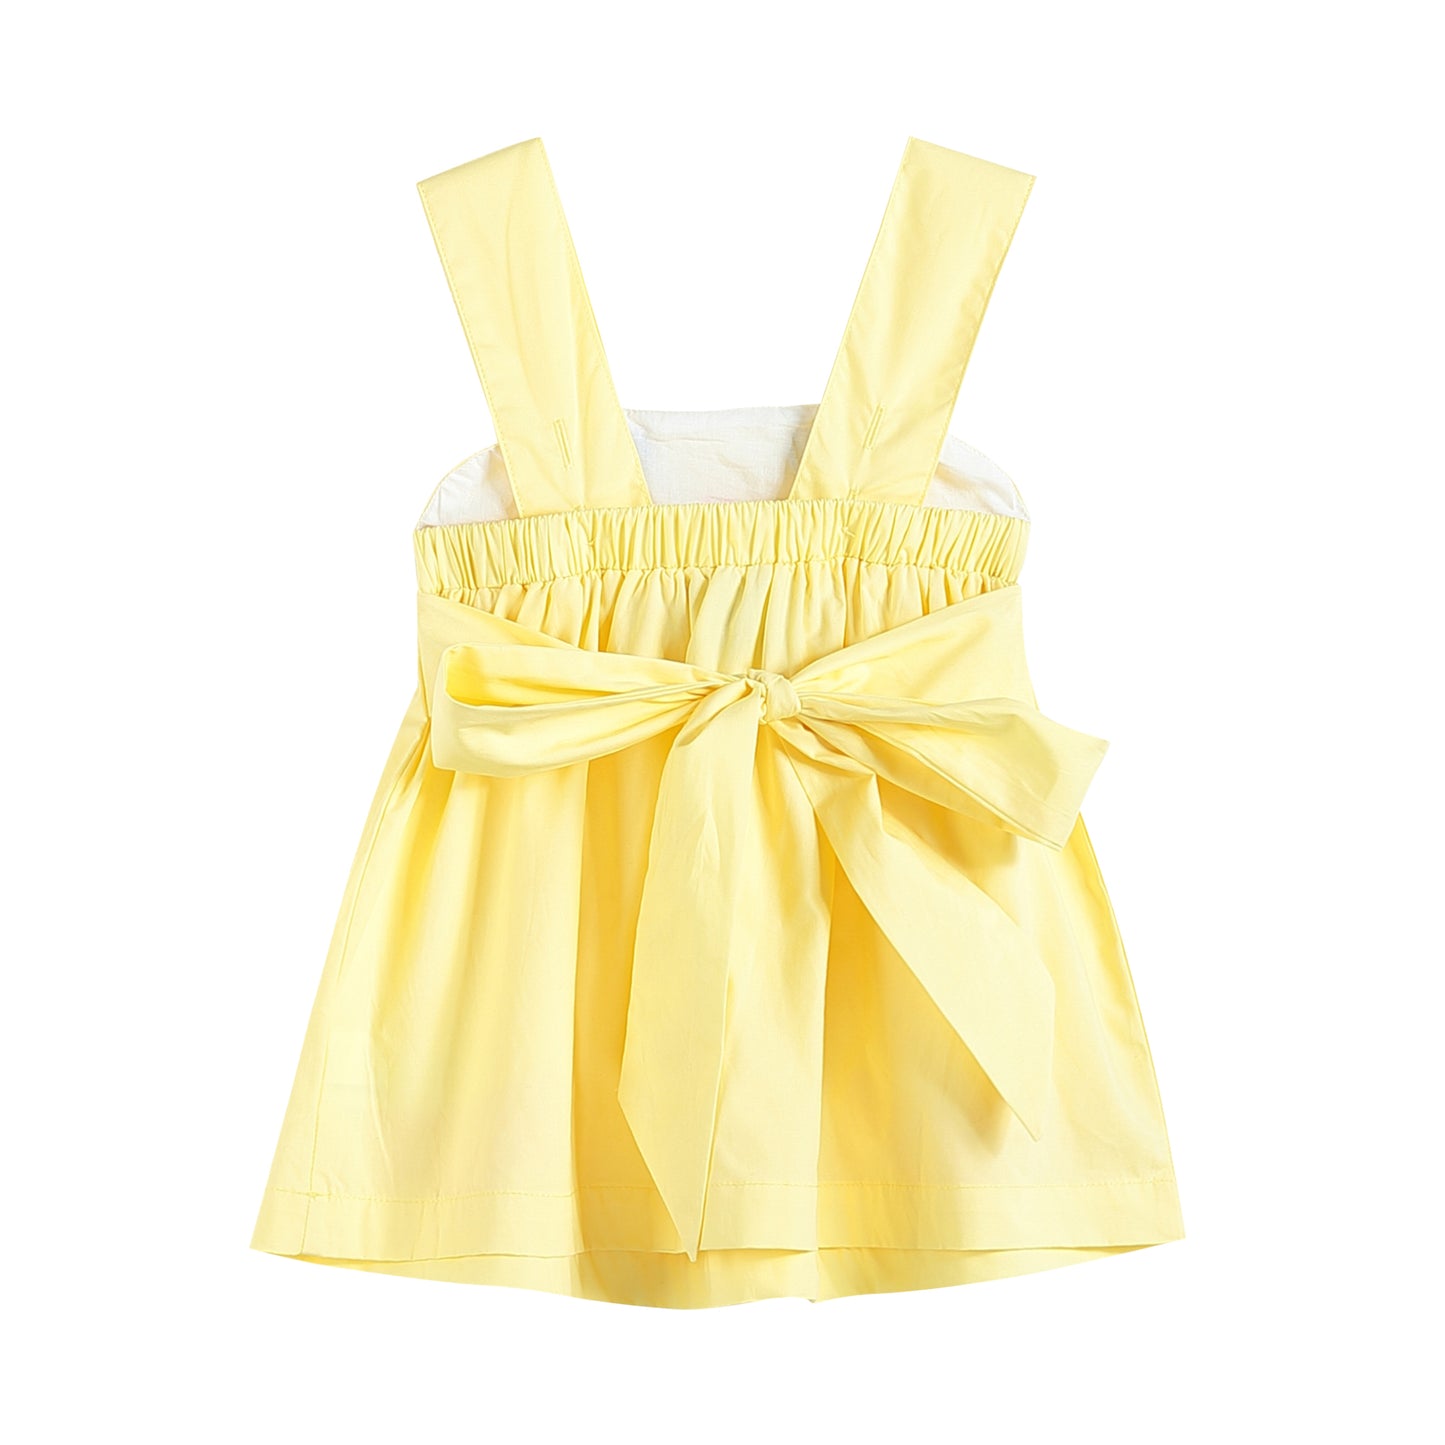 Yellow Baby Chick A-Line Dress